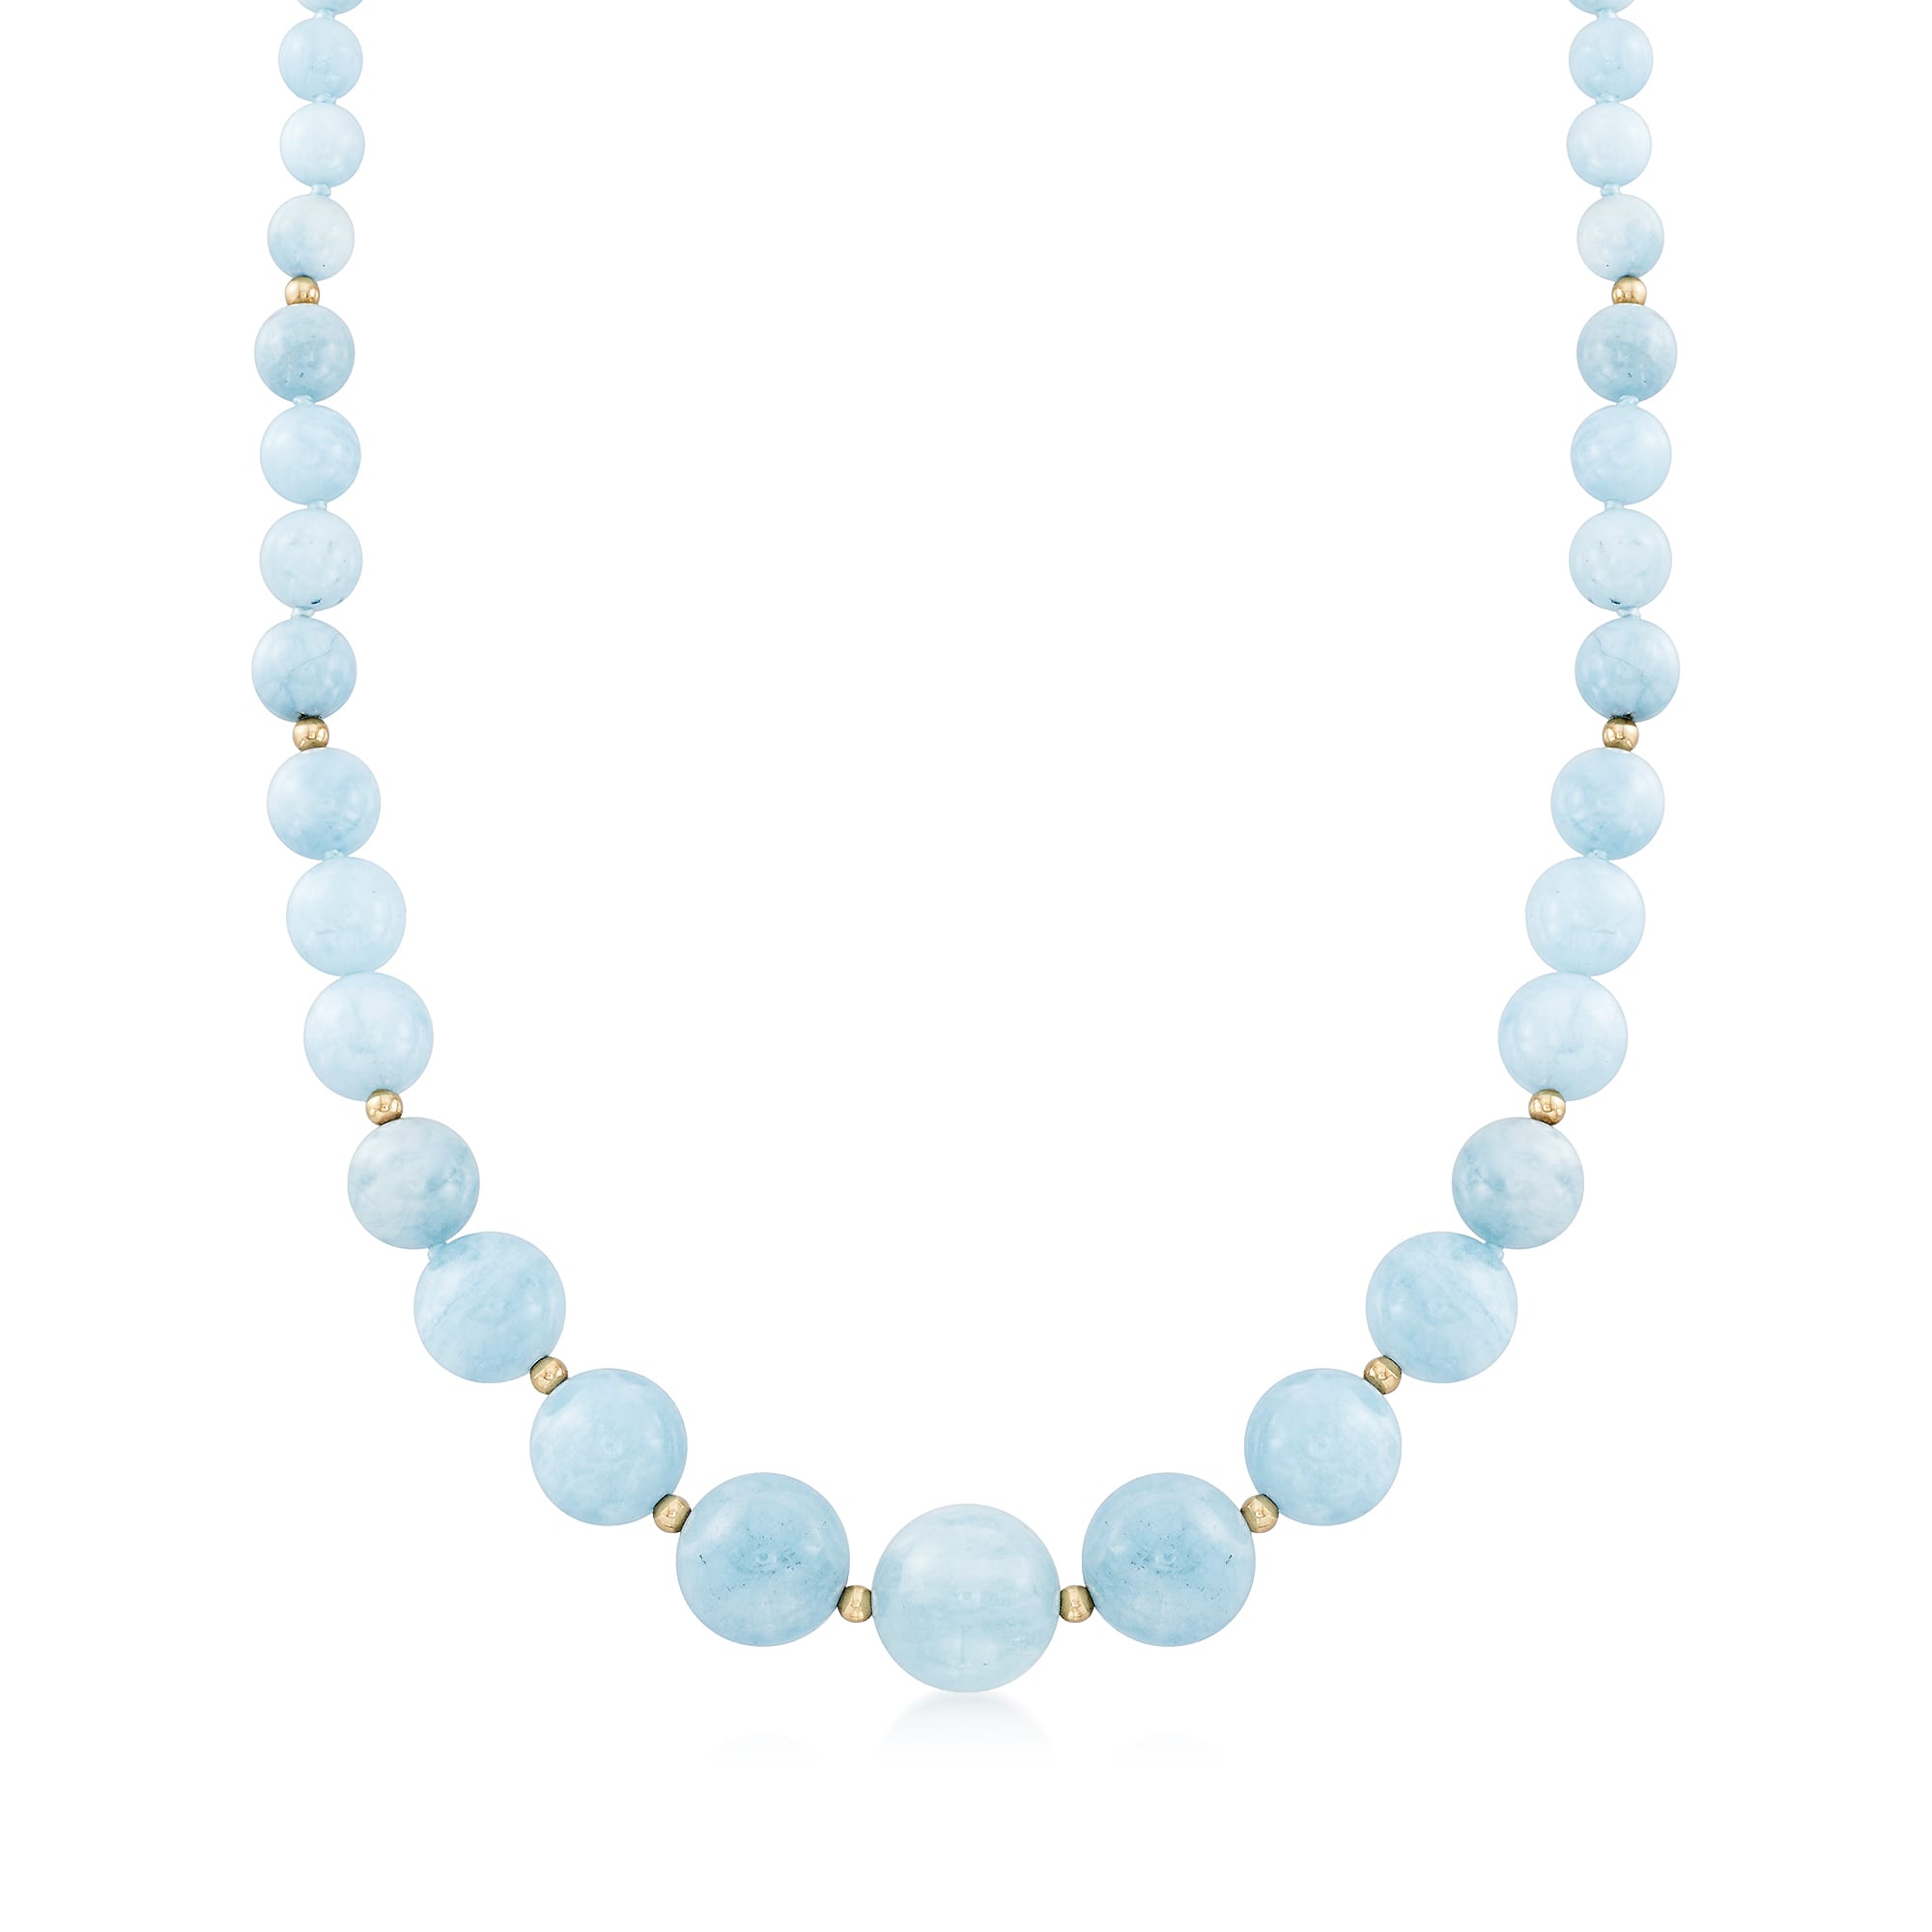 6-14mm Graduated Aquamarine Bead Necklace with 14kt Yellow Gold | Ross ...